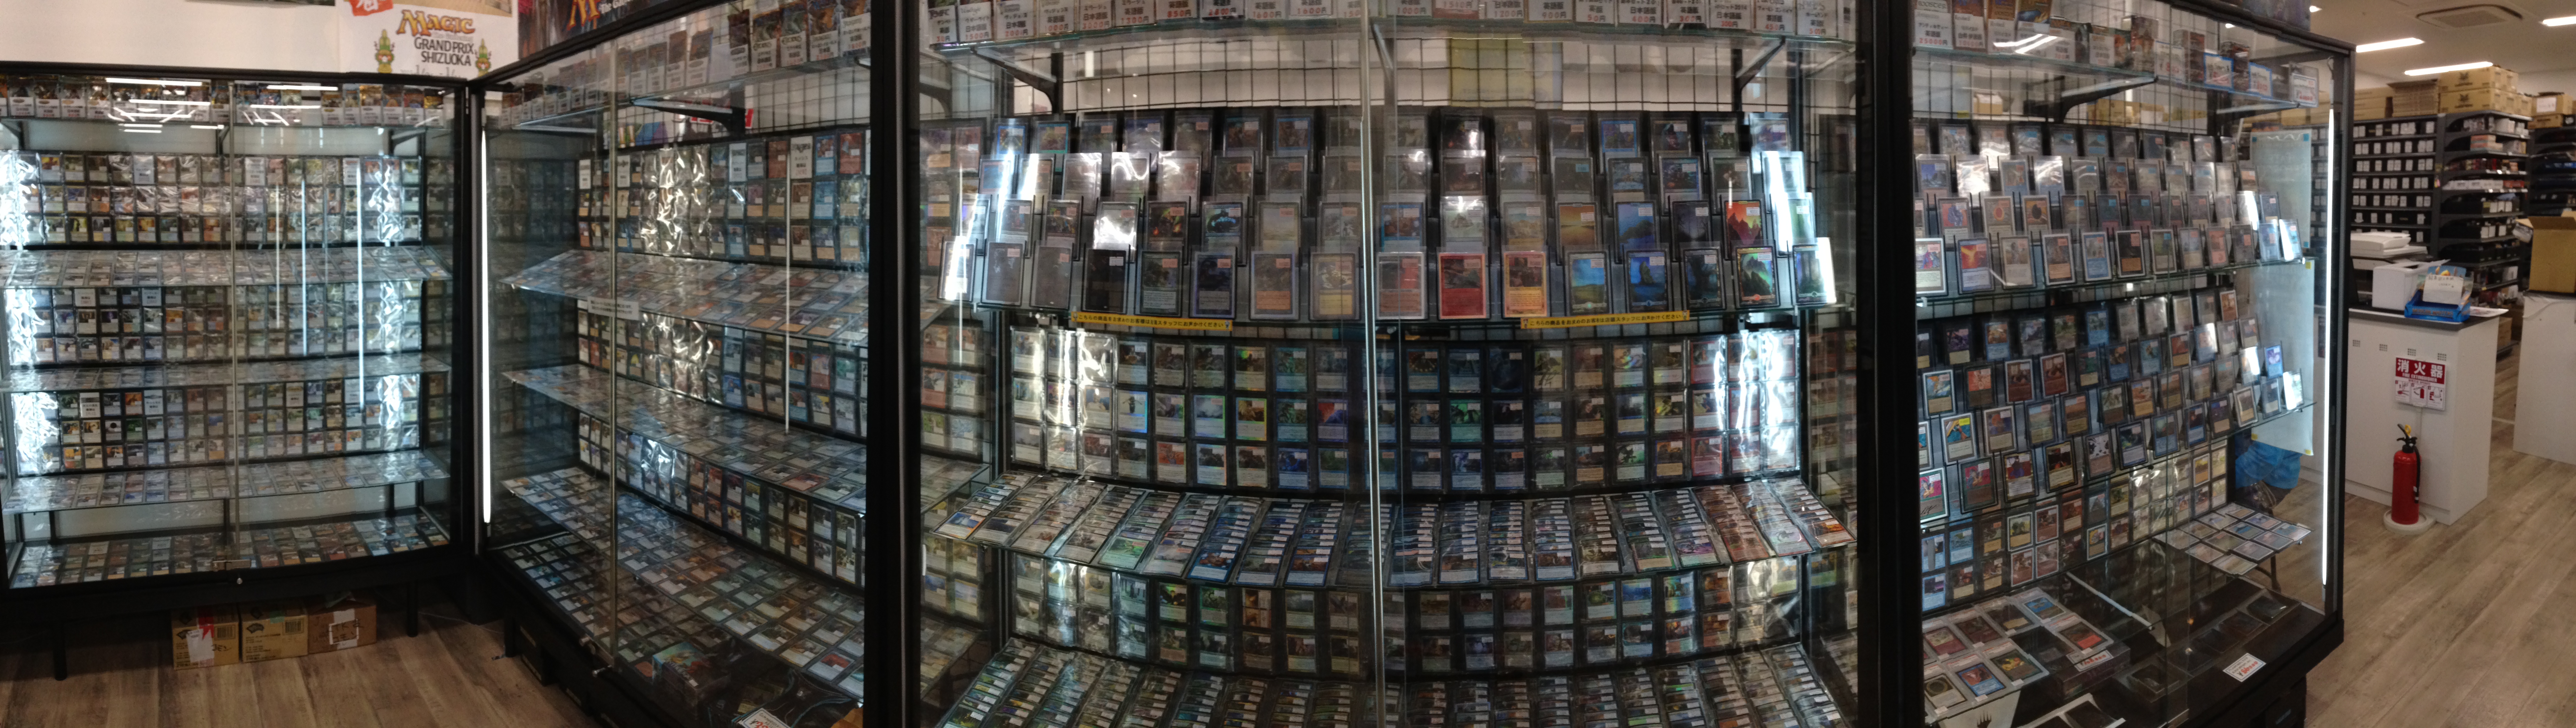 The number of unaffordable cards in the display is too damn high!